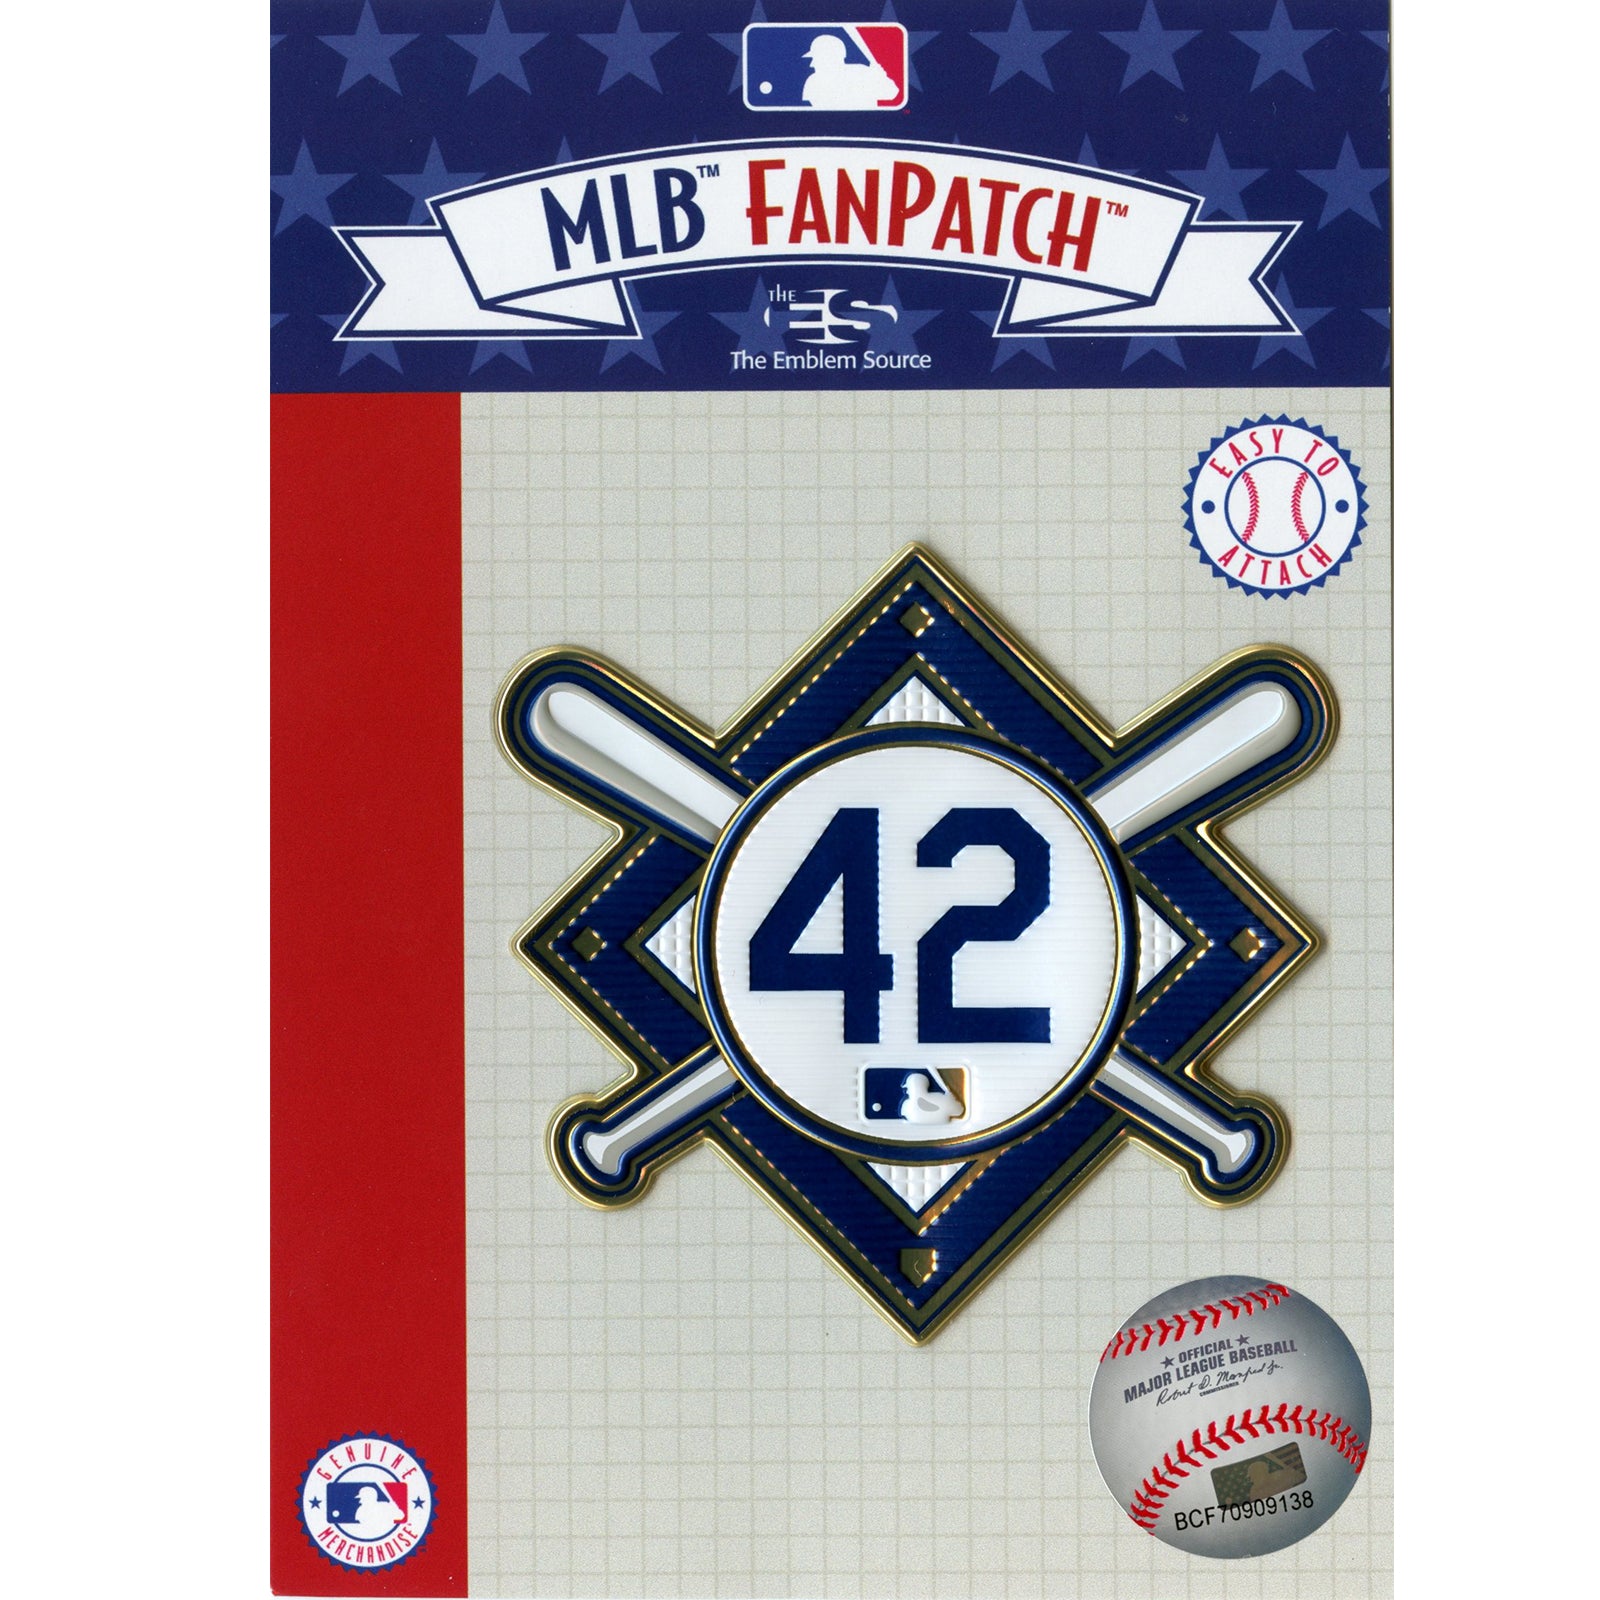 Jackie Robinson Day "42" MLB Jersey Sleeve Patch (Royals) 